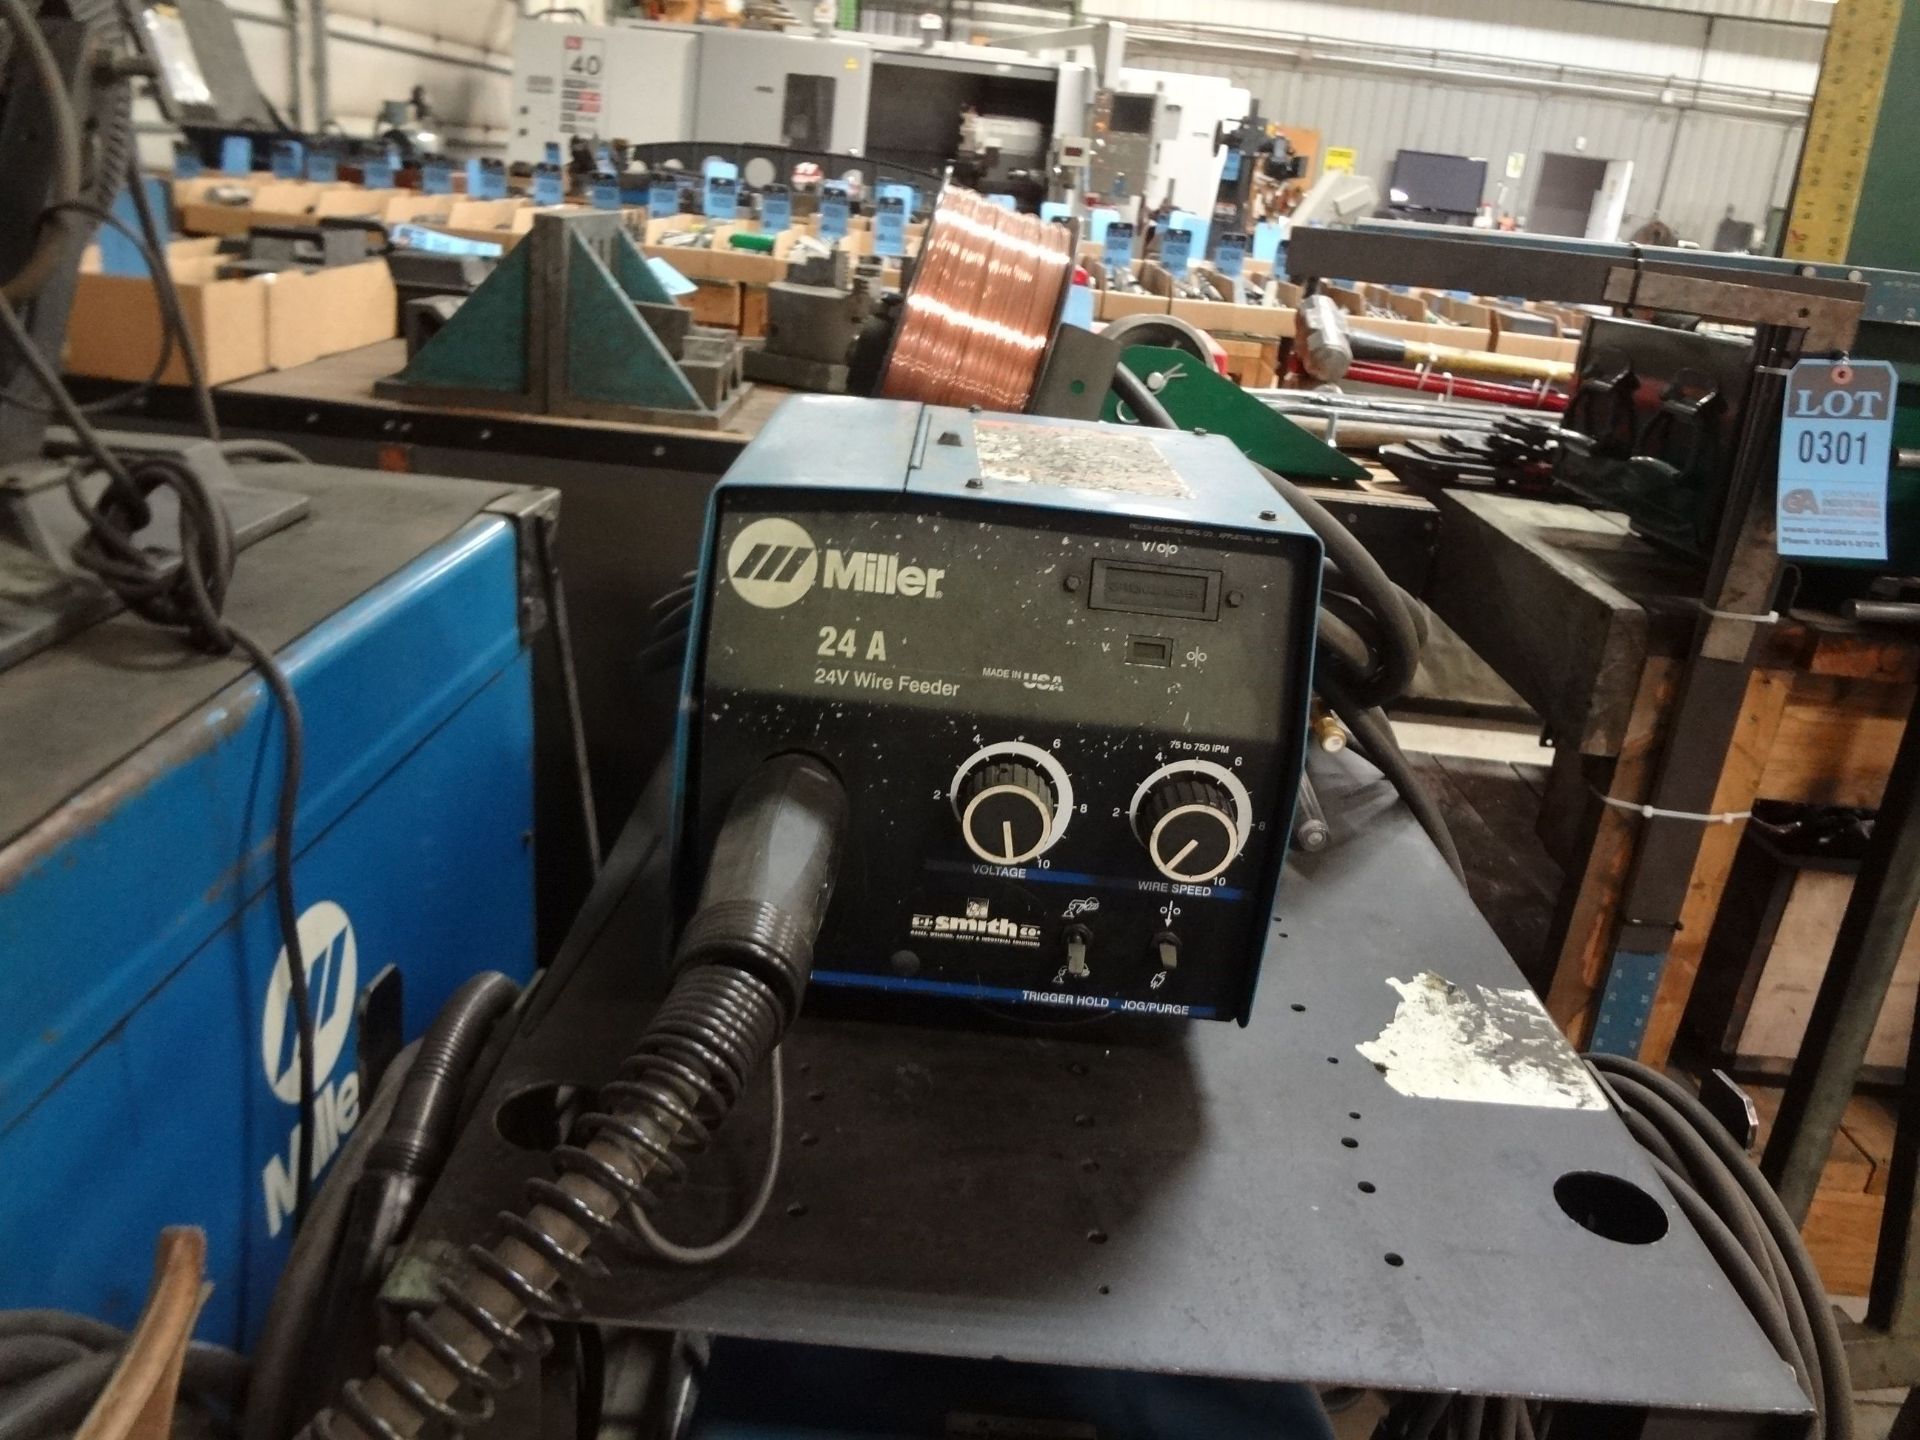 450 AMP MILLER XMT454 WELDER; S/N LH320129A, WITH MILLER 24A WIRE FEEDER - Image 3 of 3